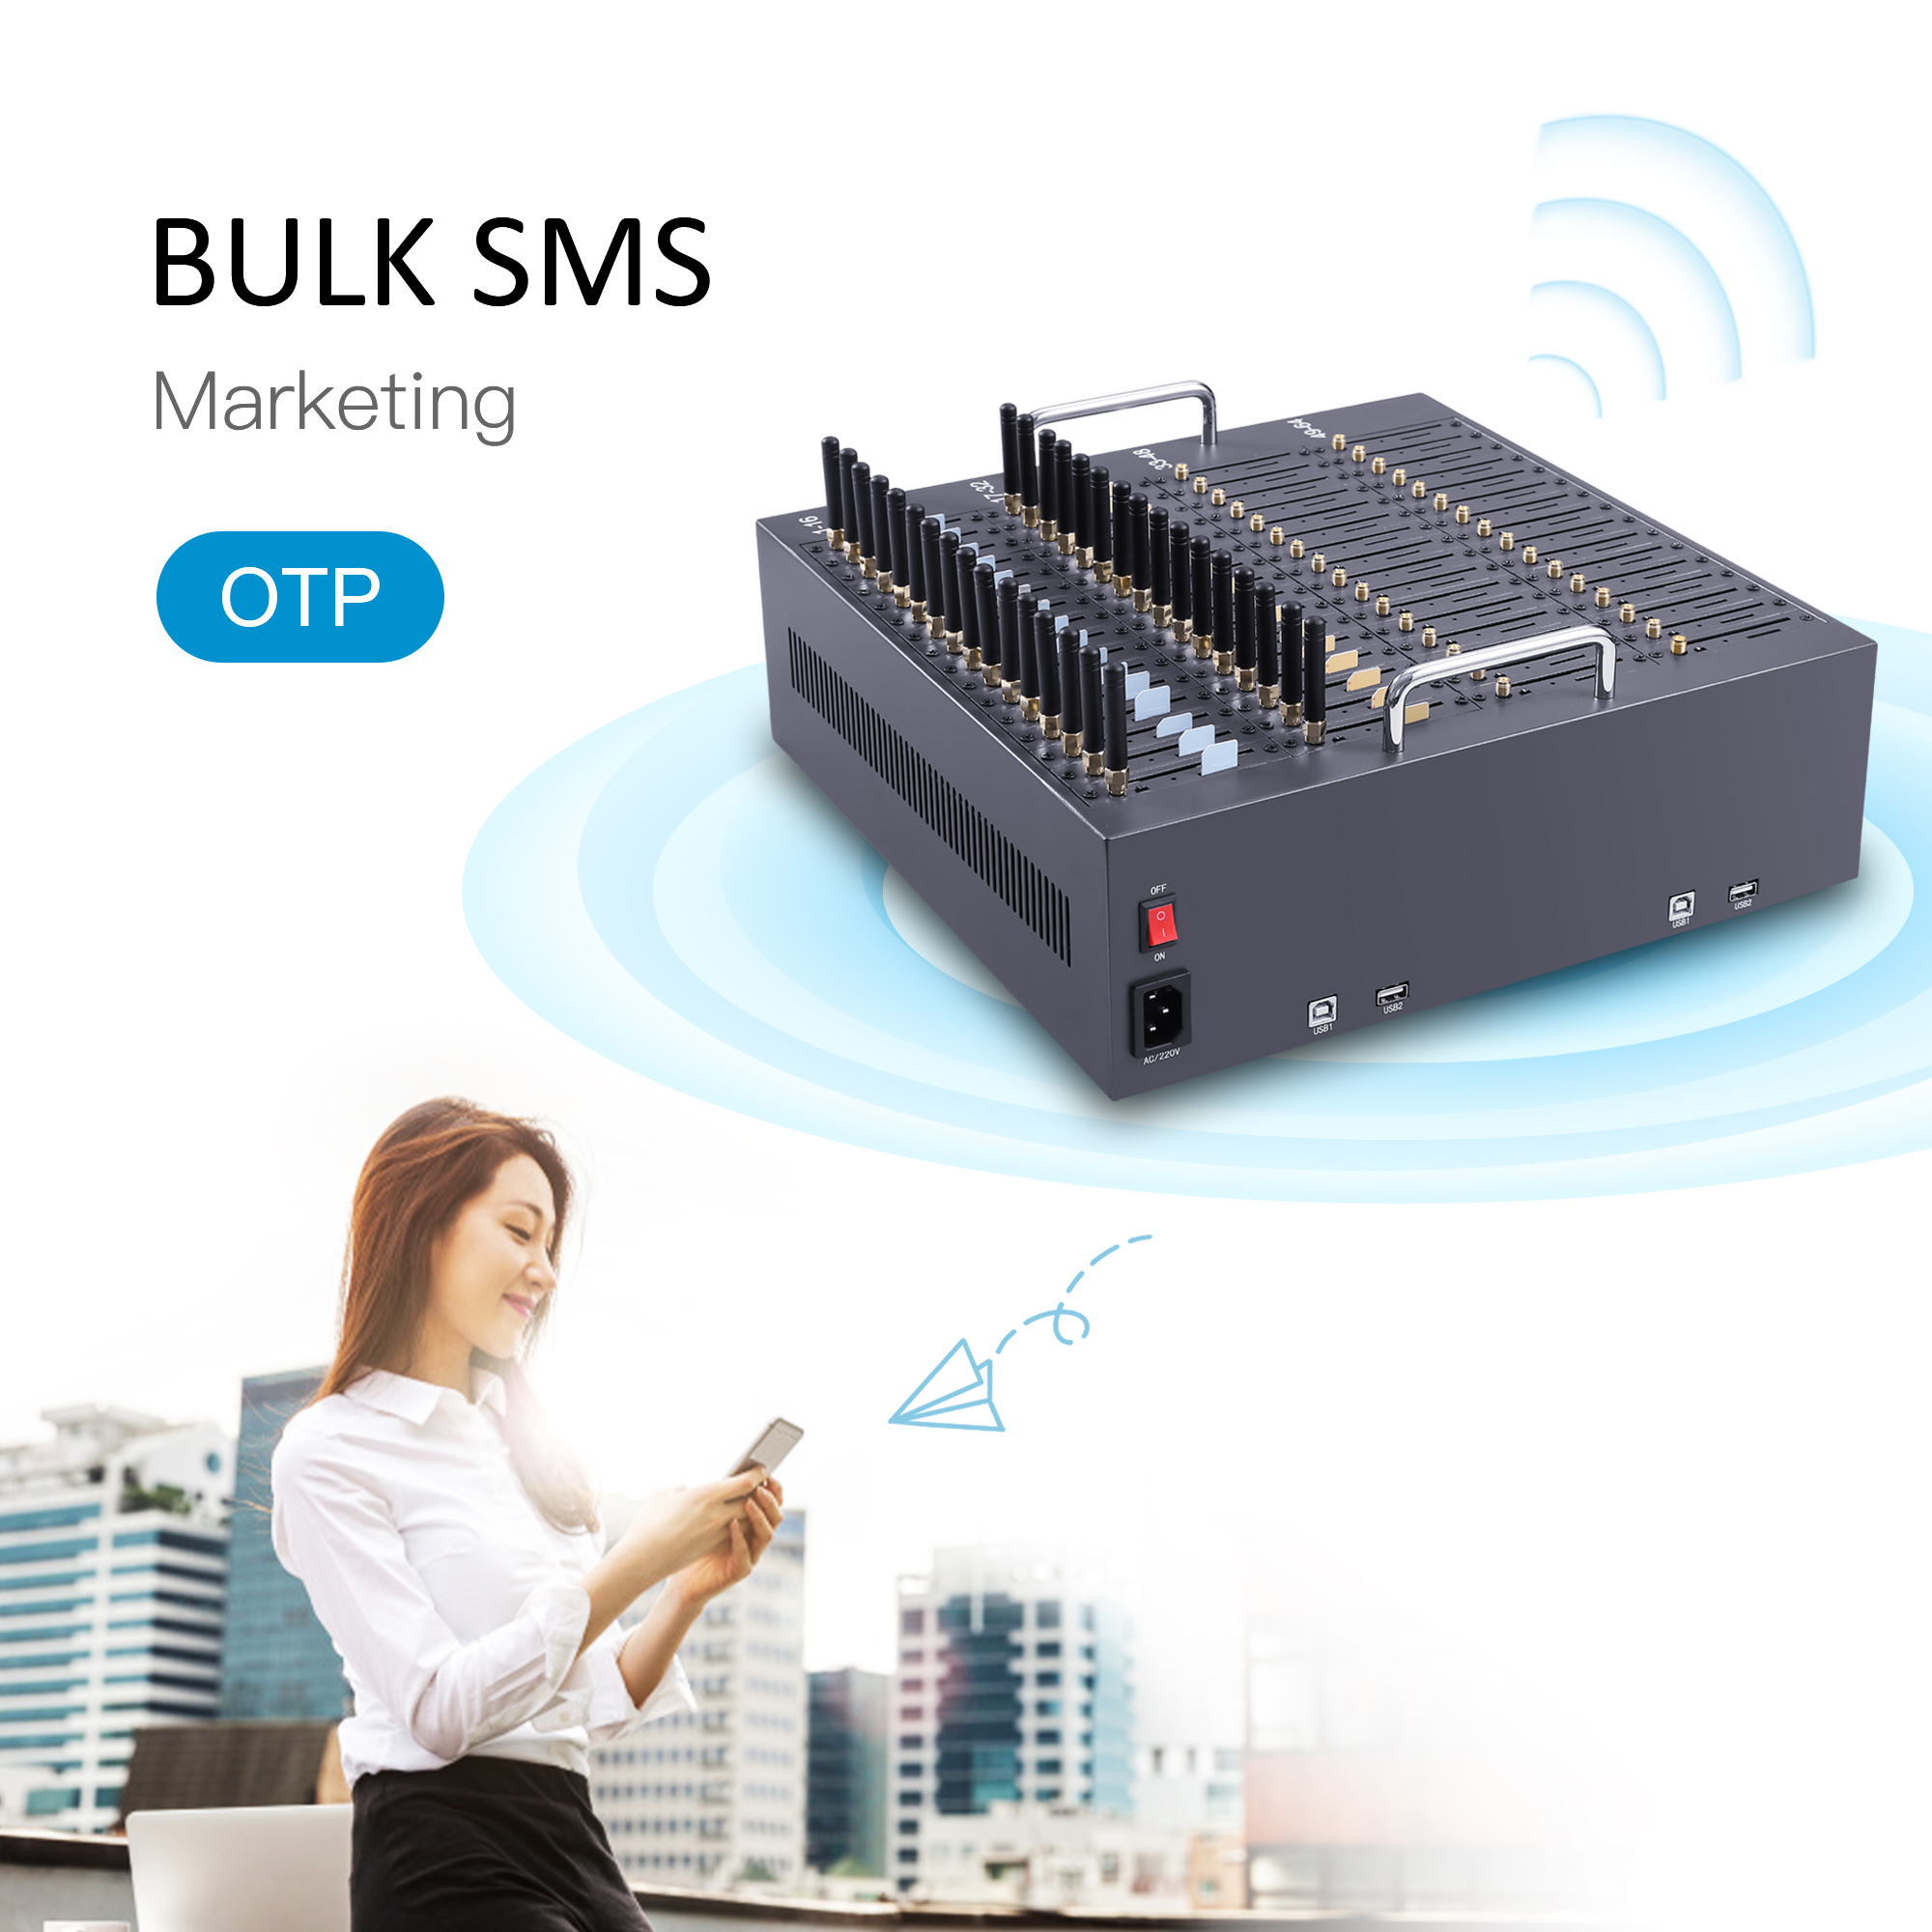 64 Ports SMS Modem Pool 4G Lte 64 Channels Popular Device Support AT Command Factory Direct Modem Luna Free Tech Support Bulk Sms